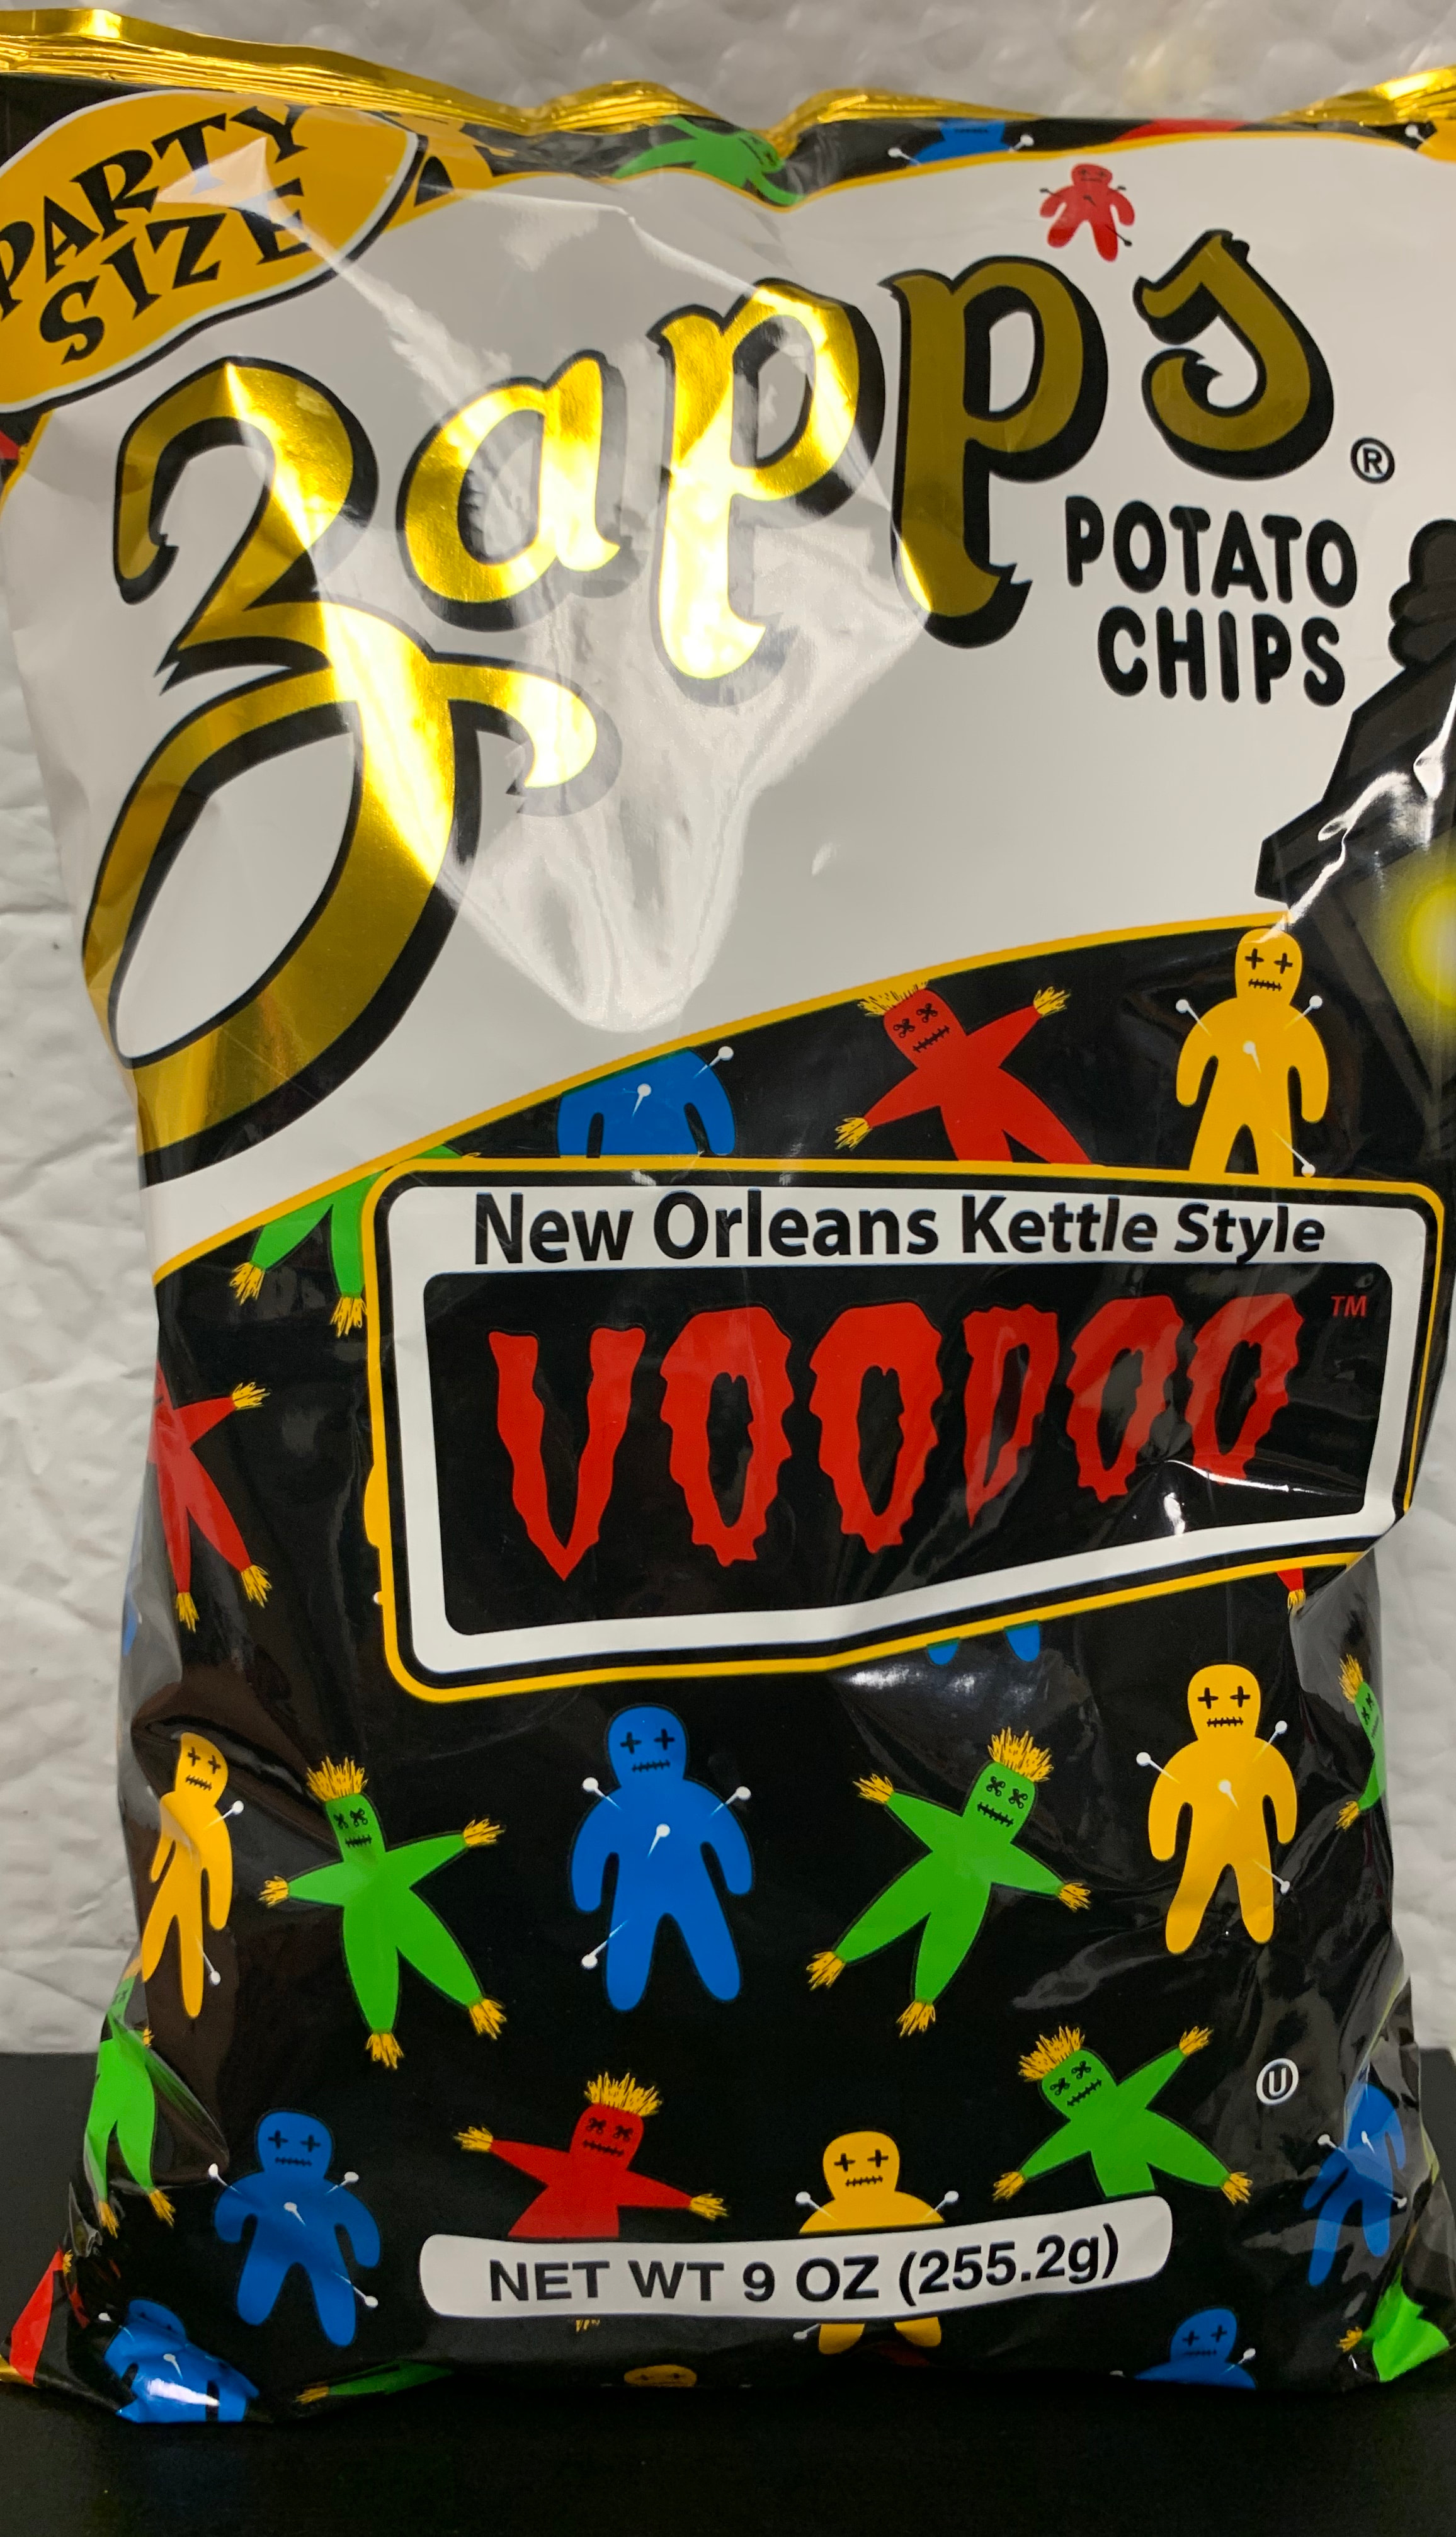 Who Sells Voodoo Chips